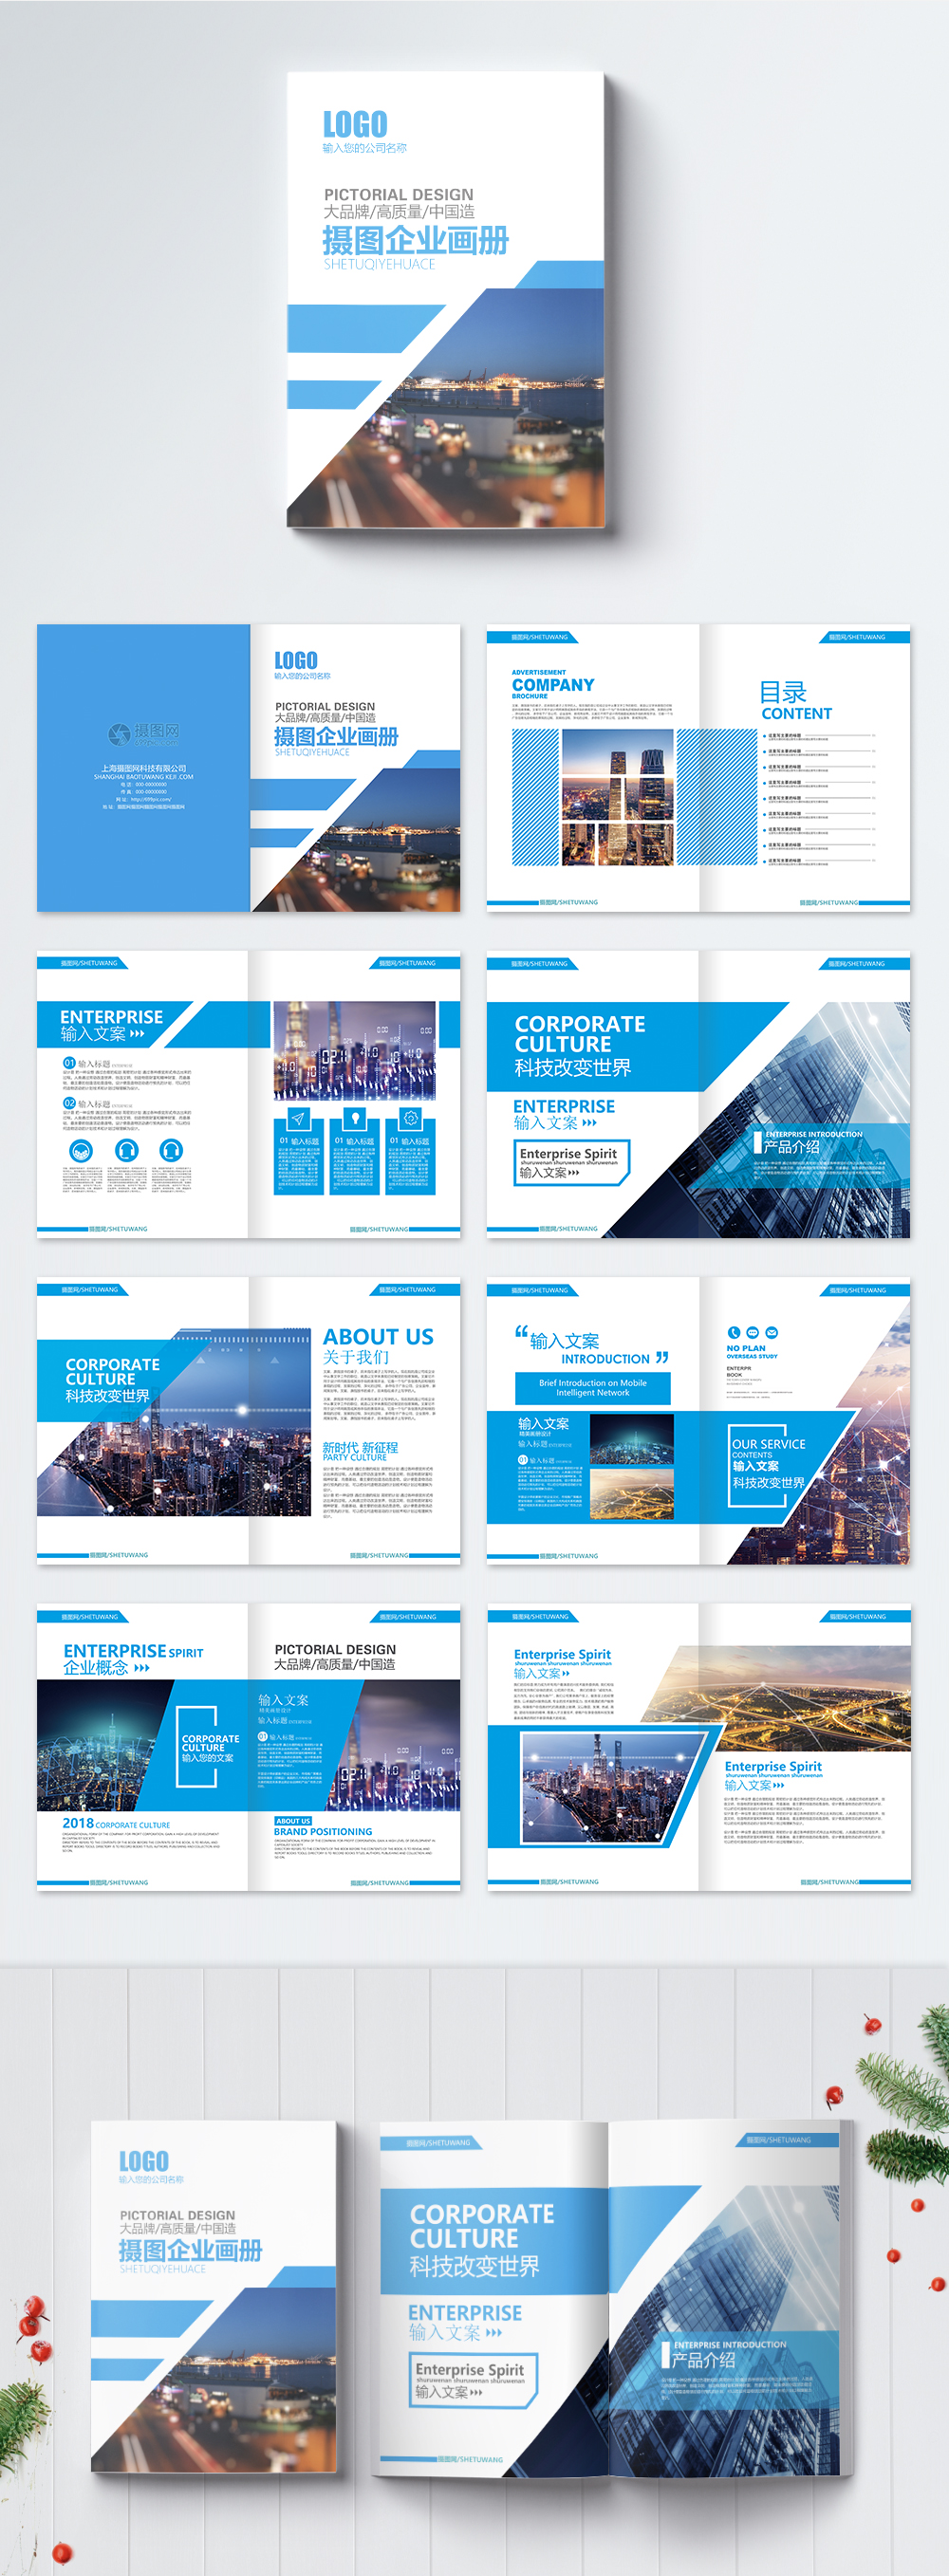 Blue business brochure template image_picture free download 400178030 ...